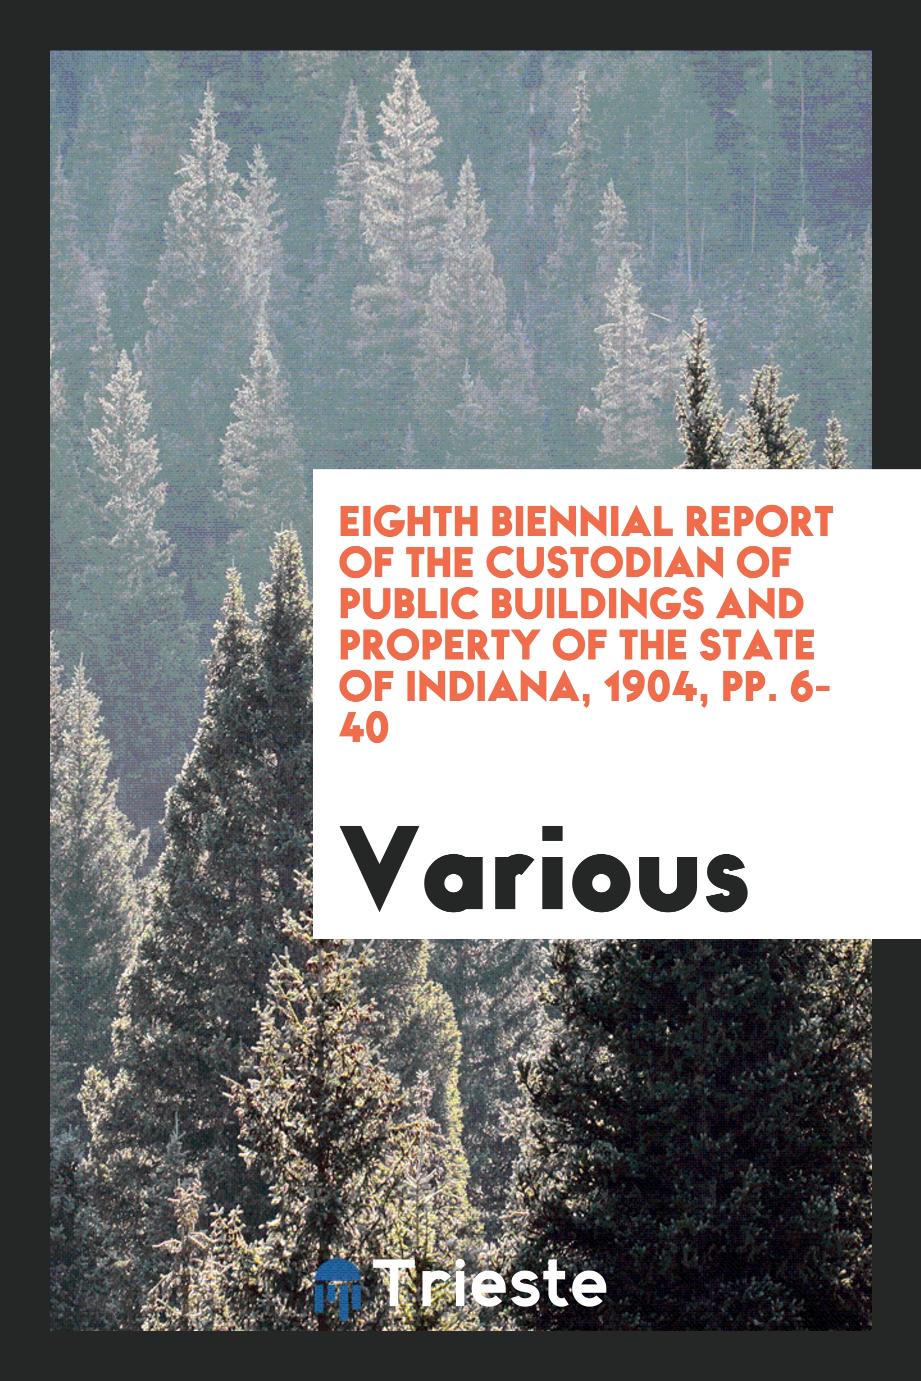 Eighth Biennial Report of the Custodian of Public Buildings and Property of the State of Indiana, 1904, pp. 6-40